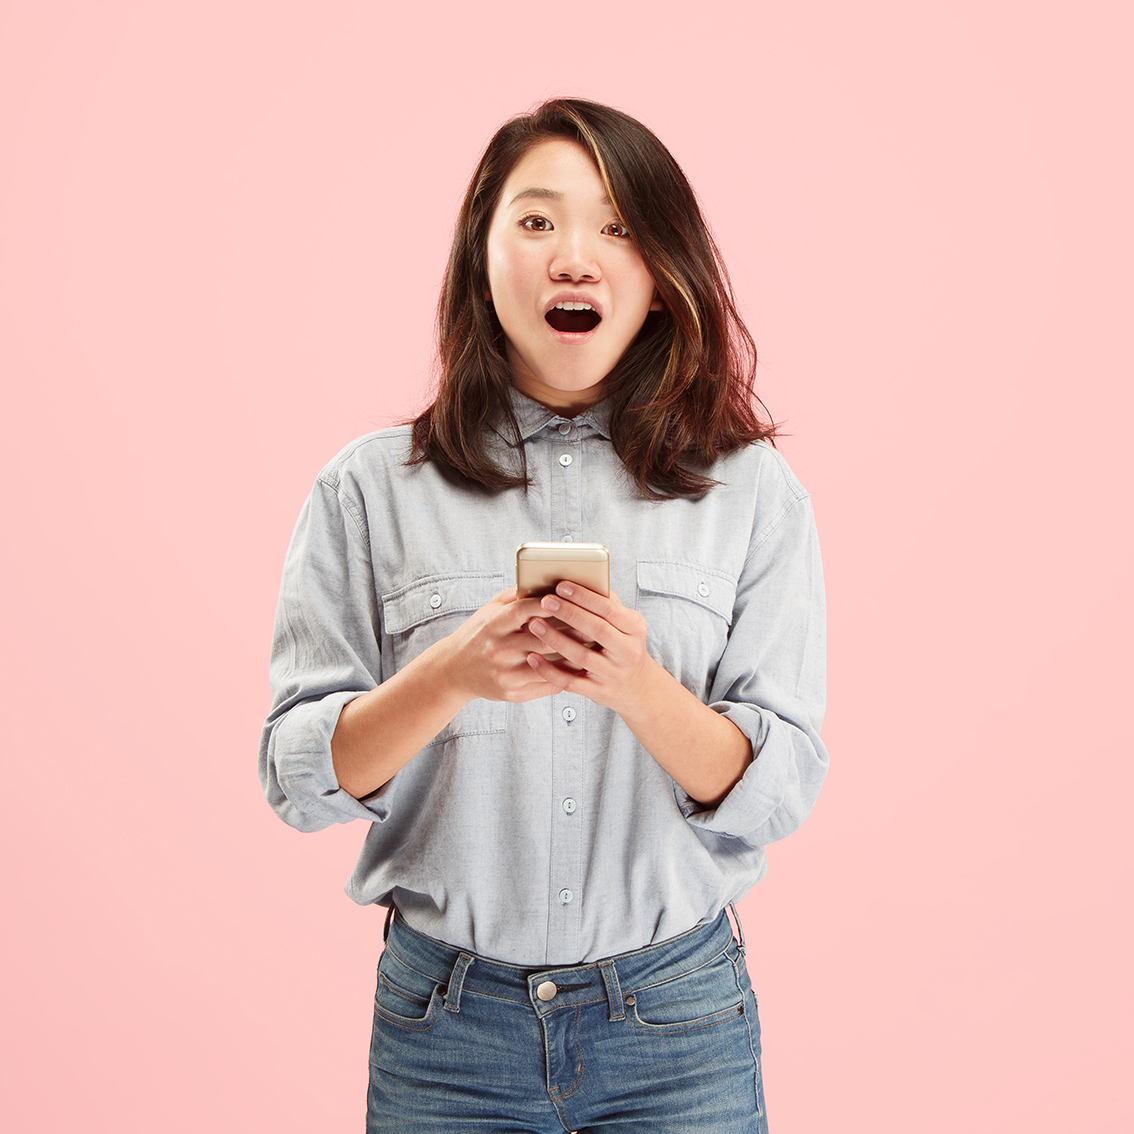 Young woman in a canadian tuxedo with shoulder length brown hair holding her smart phone with an excited expression.